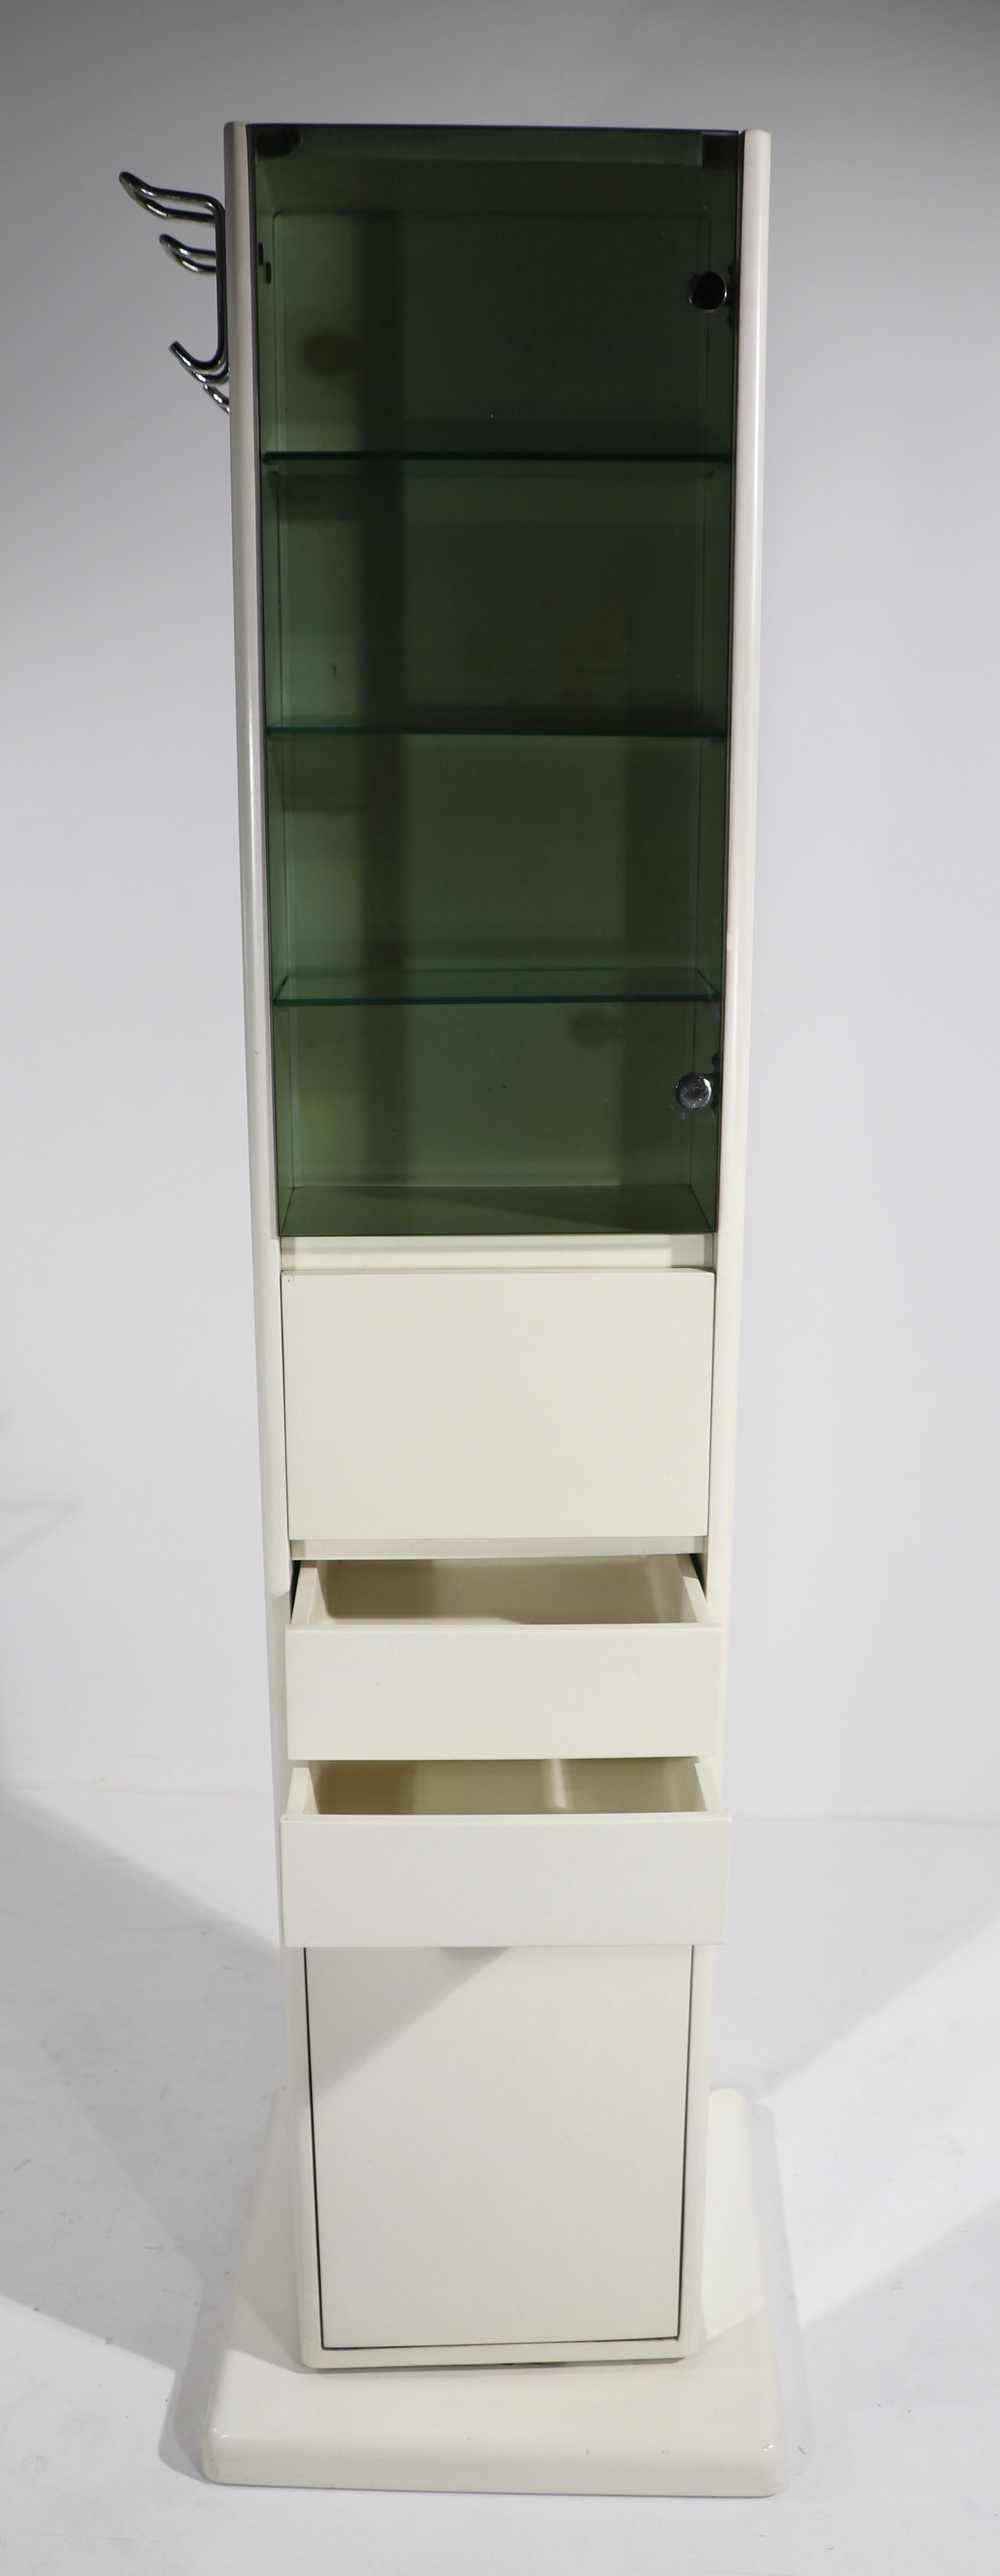 Unusual Revolving Kitchen Storage Cabinet after Colombo 4